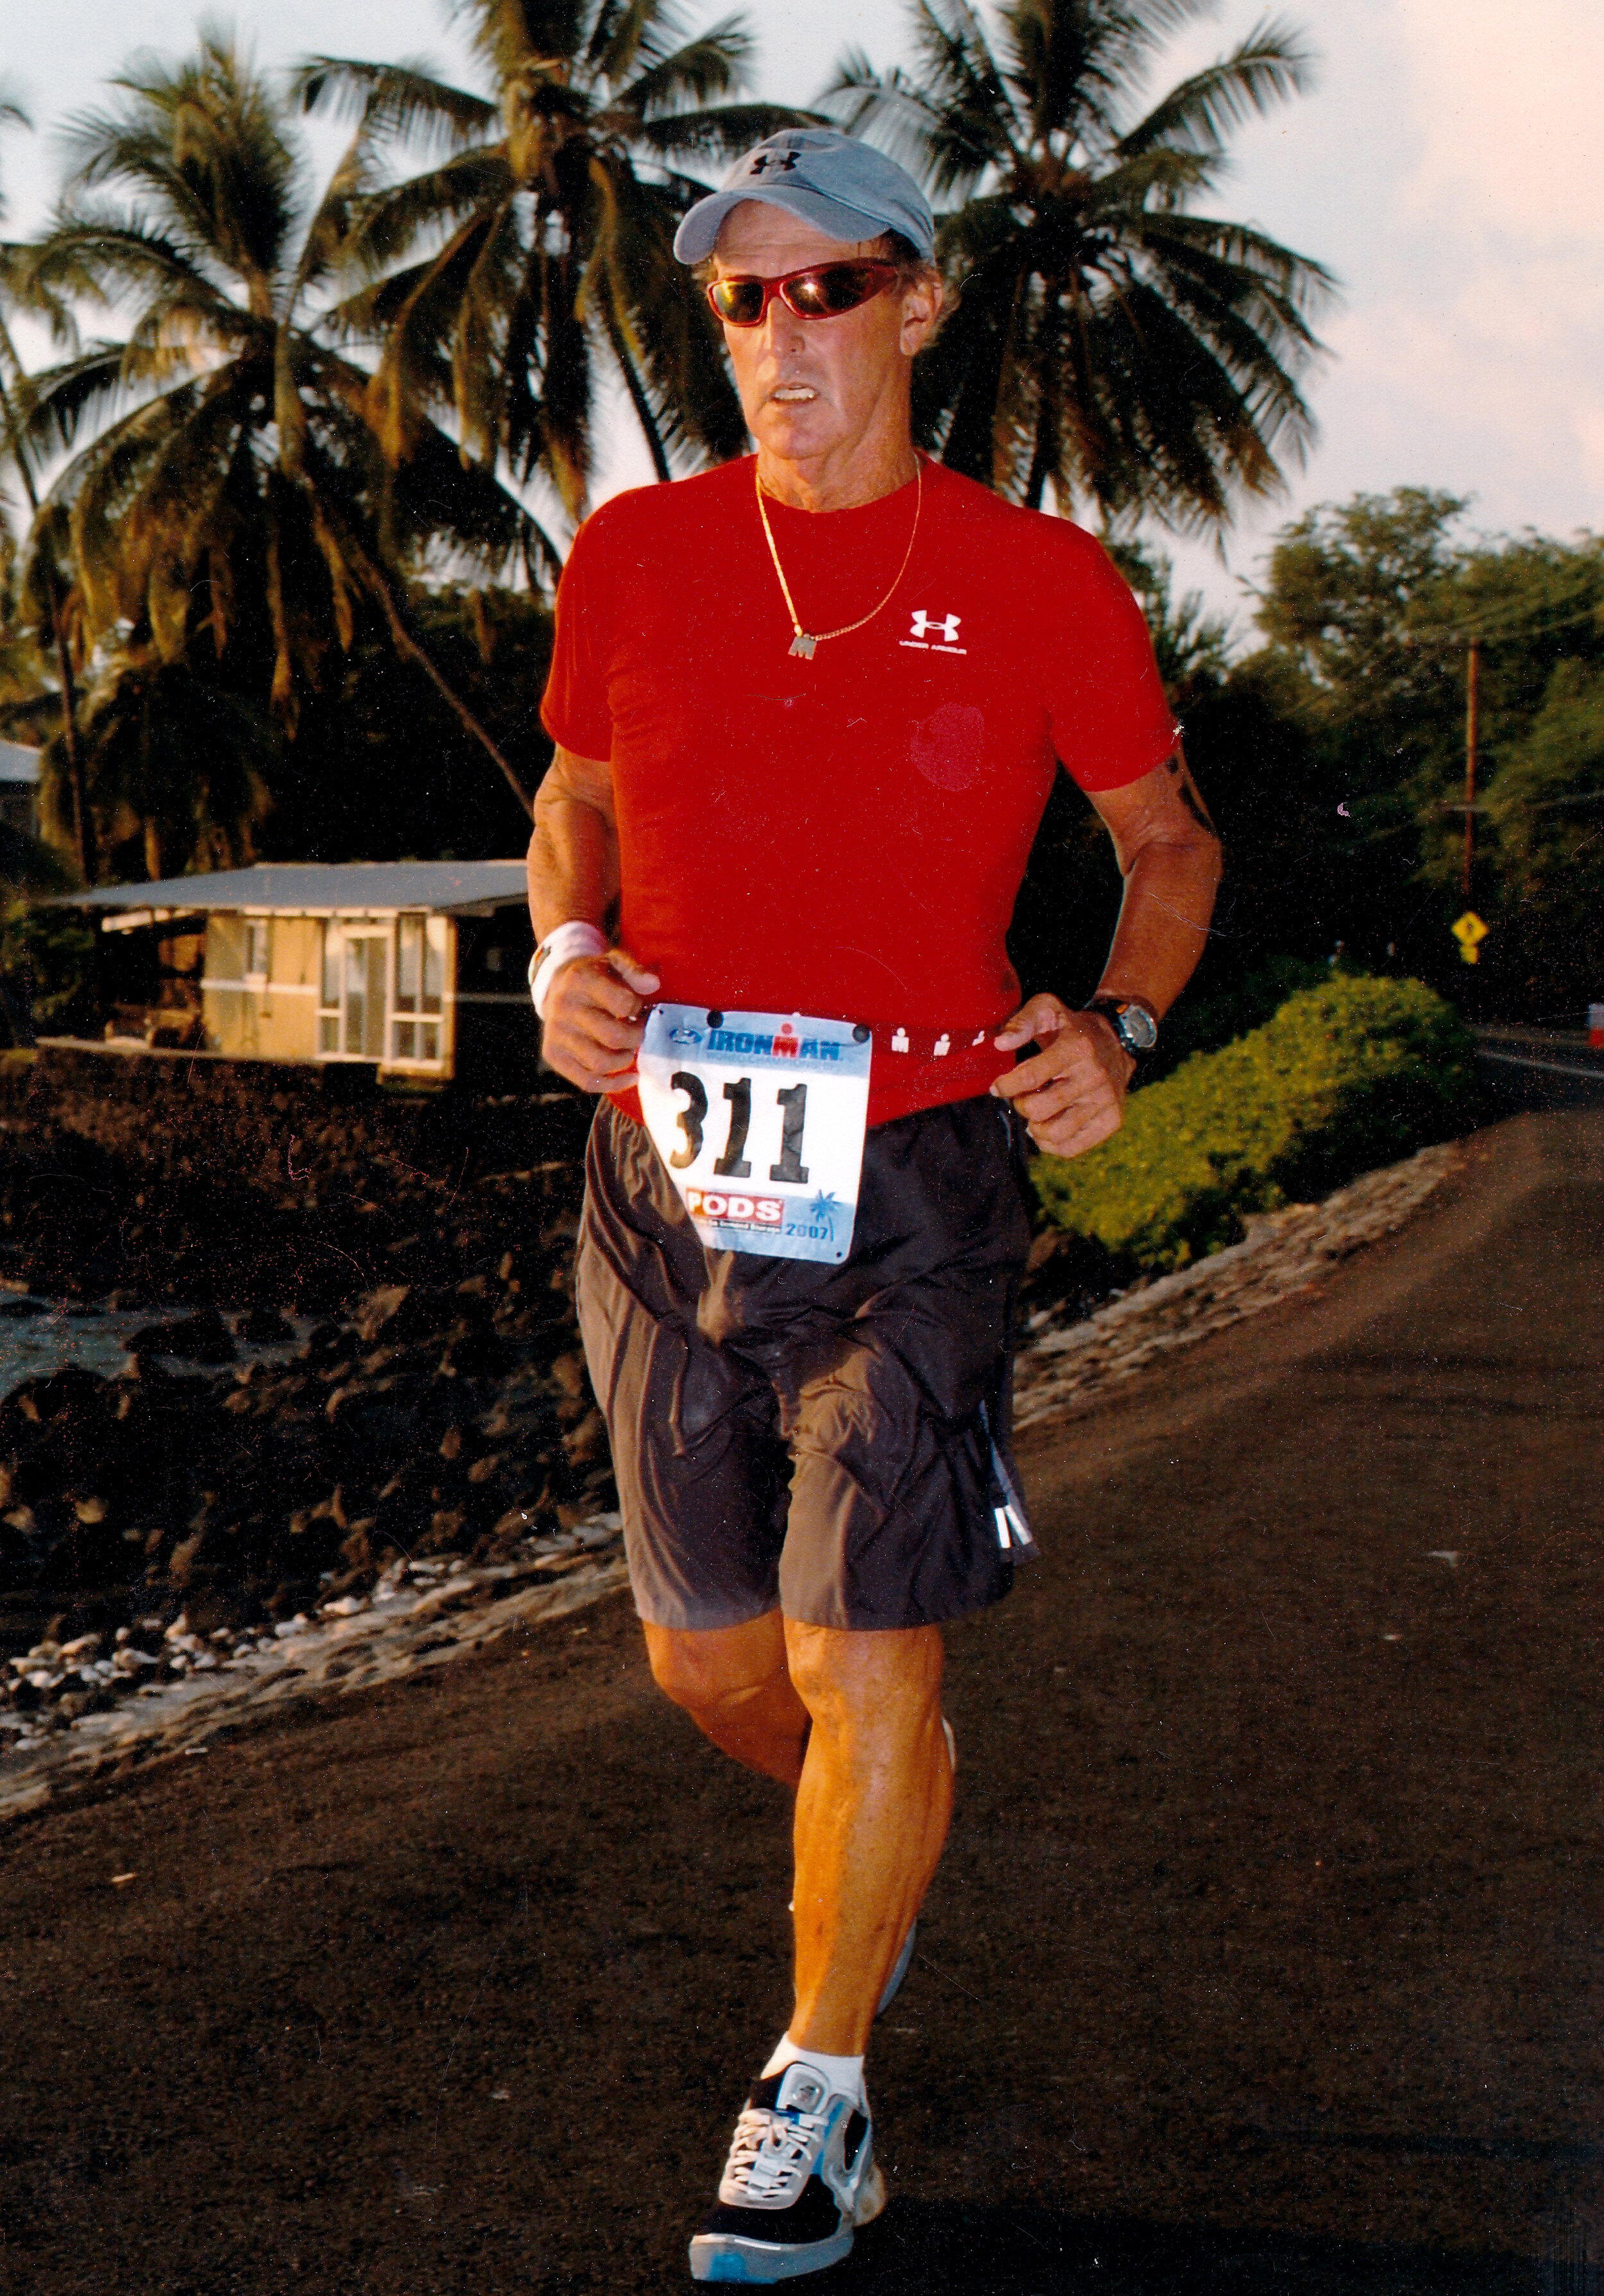 Completing the 2007 Ironman Championships with a 26.2-mile run.